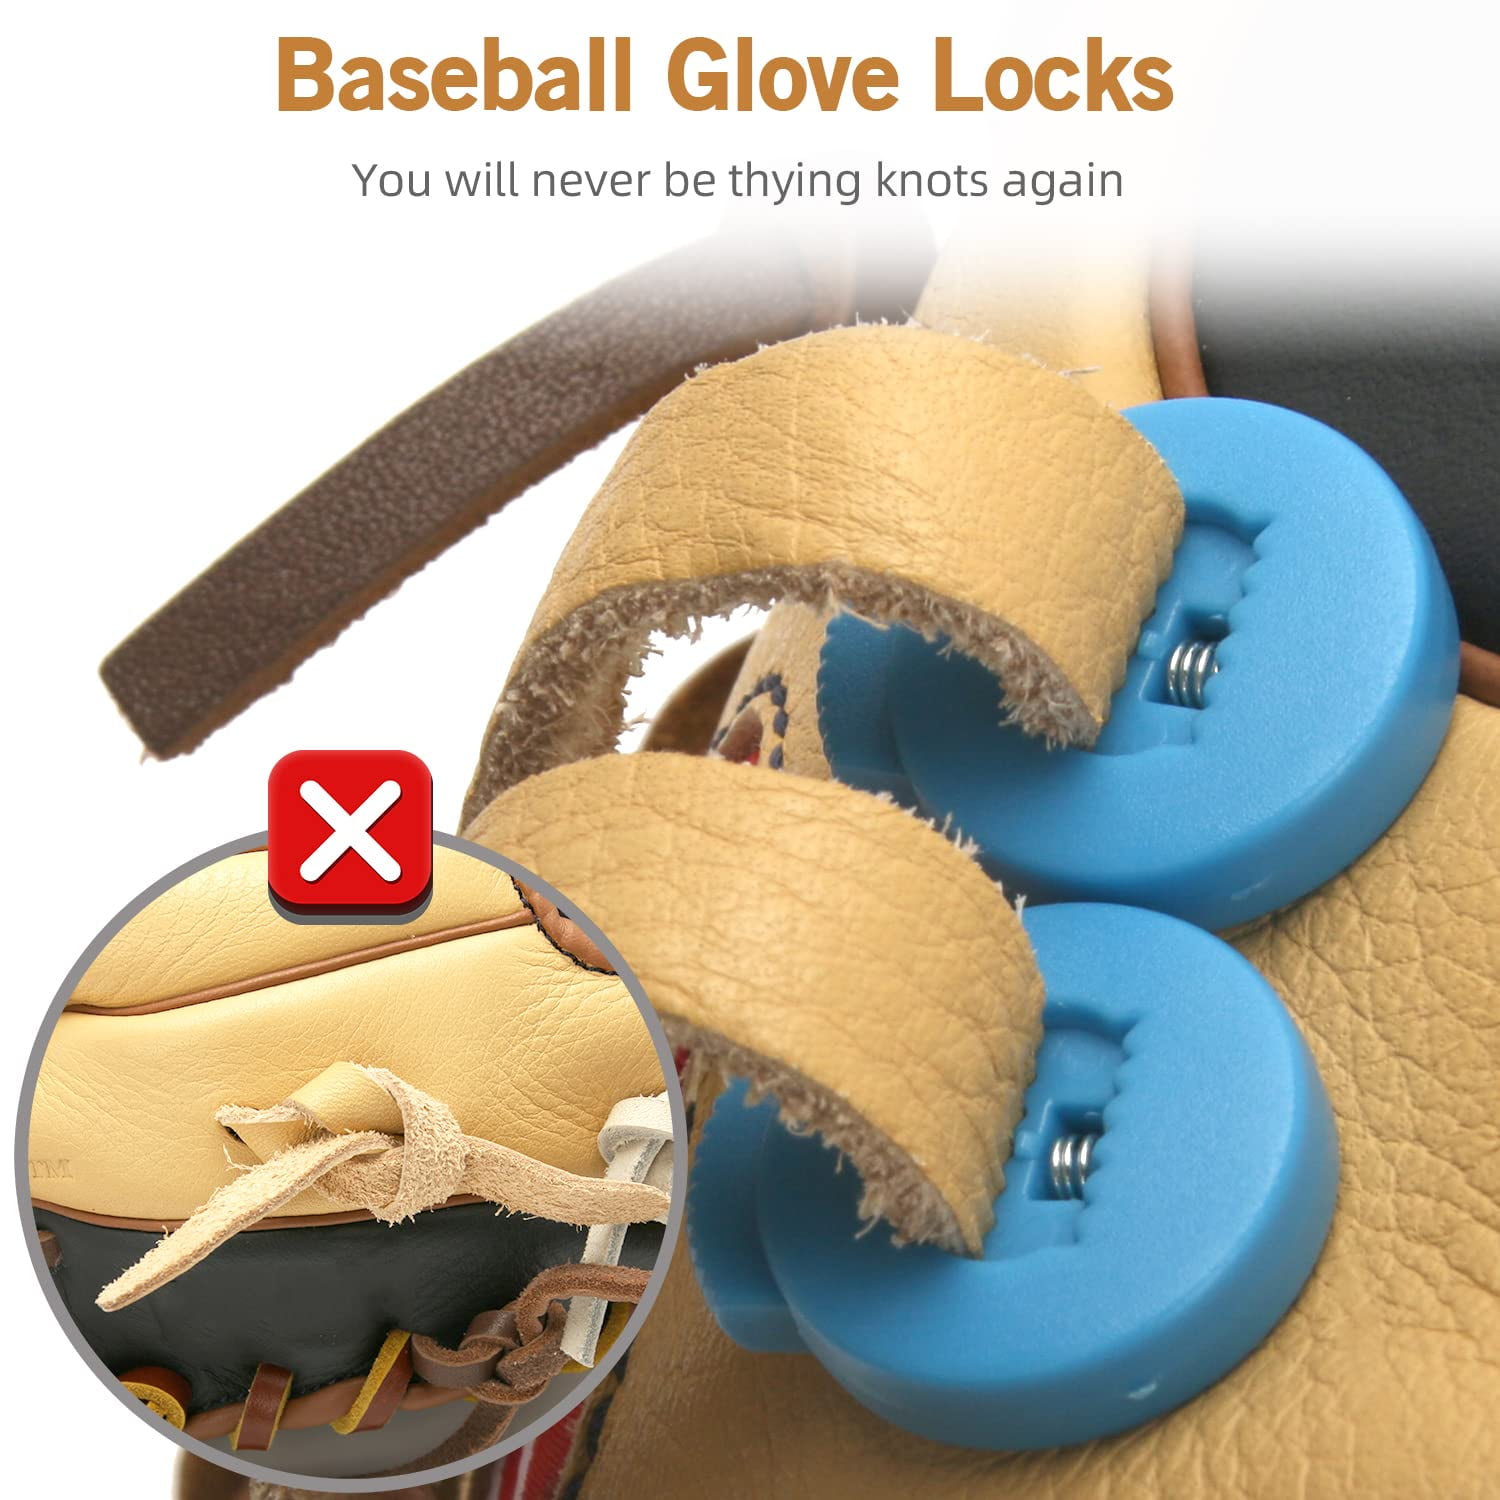 Glove Locks Baseball 48 Pack,Glove Baseball Laces Lock Is Sturdy,No Knot  Required,Glove Locks Suitable For All Gloves